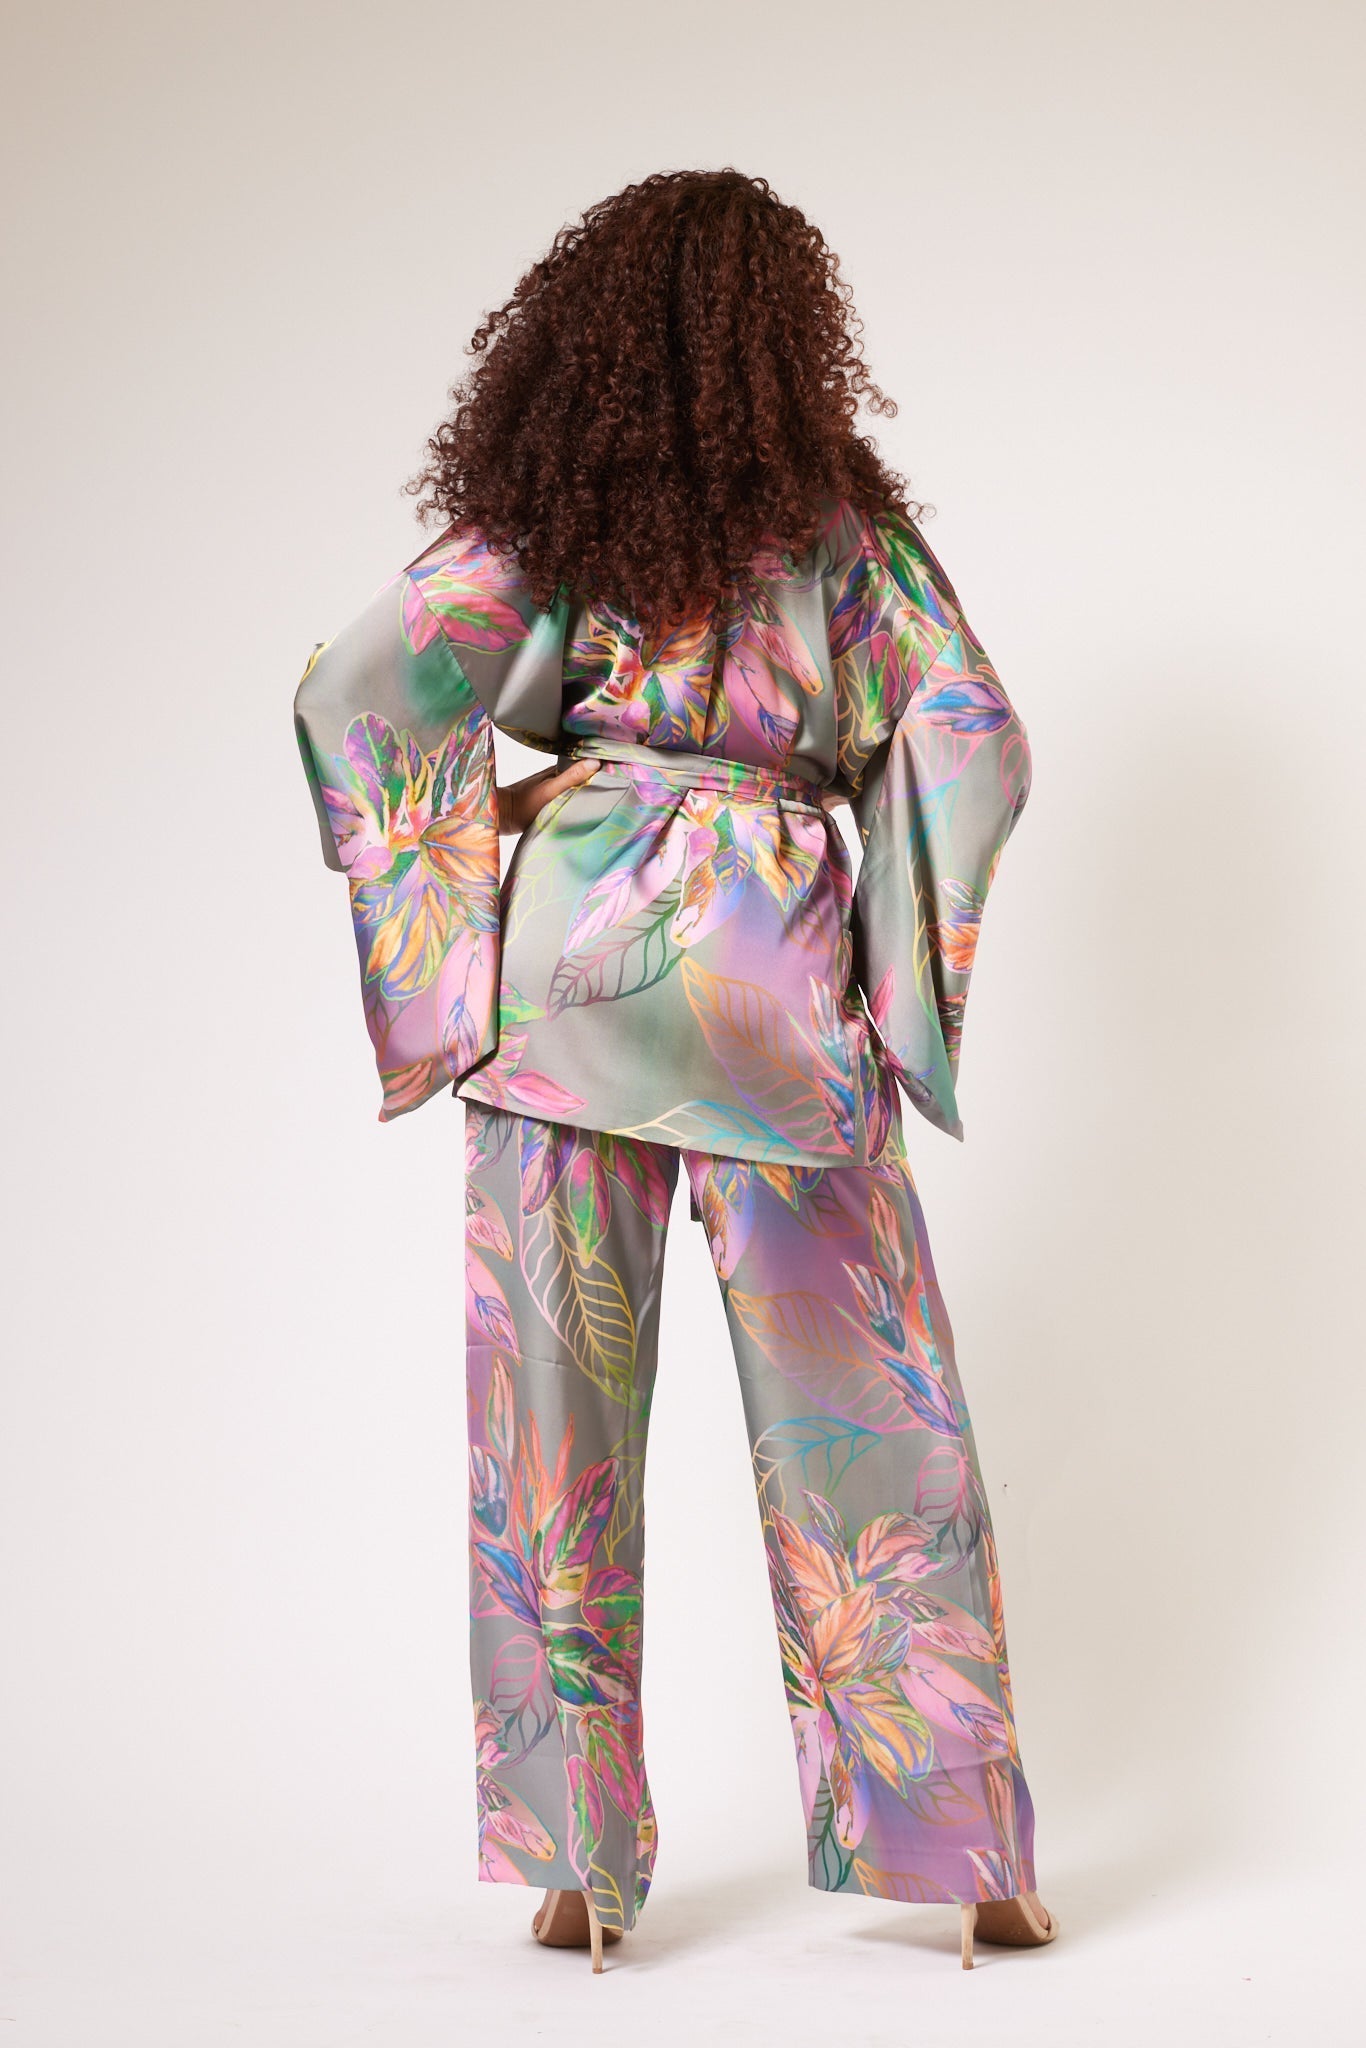 back profile of woman modelling all over multicolored tropical print kimono duster and matching yacht slacks made with recycled textiles